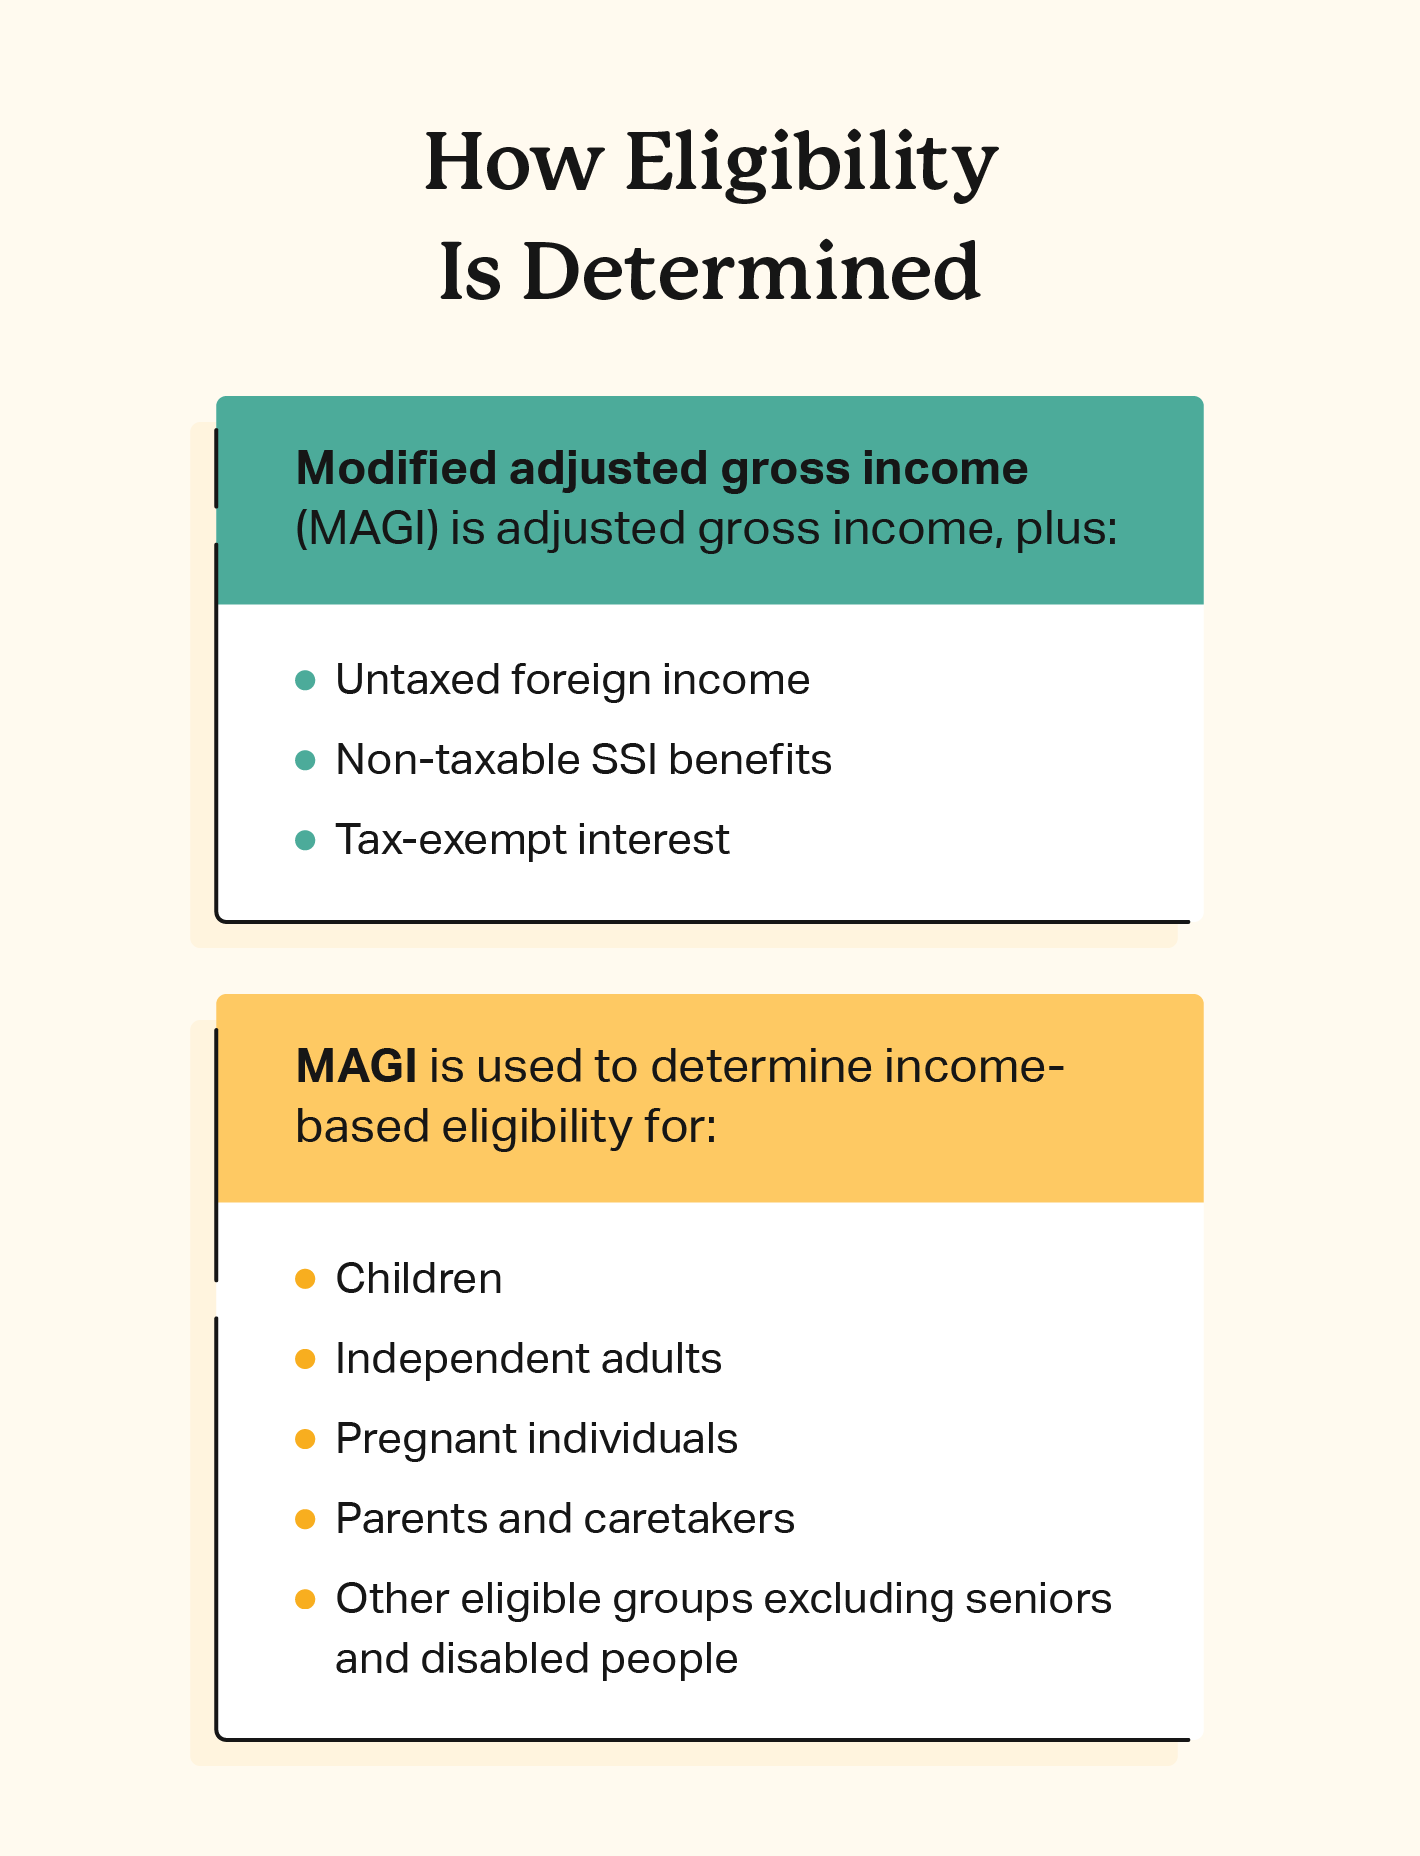 Image defines modified adjusted gross income (MAGI), which is used for income eligibility for most groups excluding seniors and disabled people.